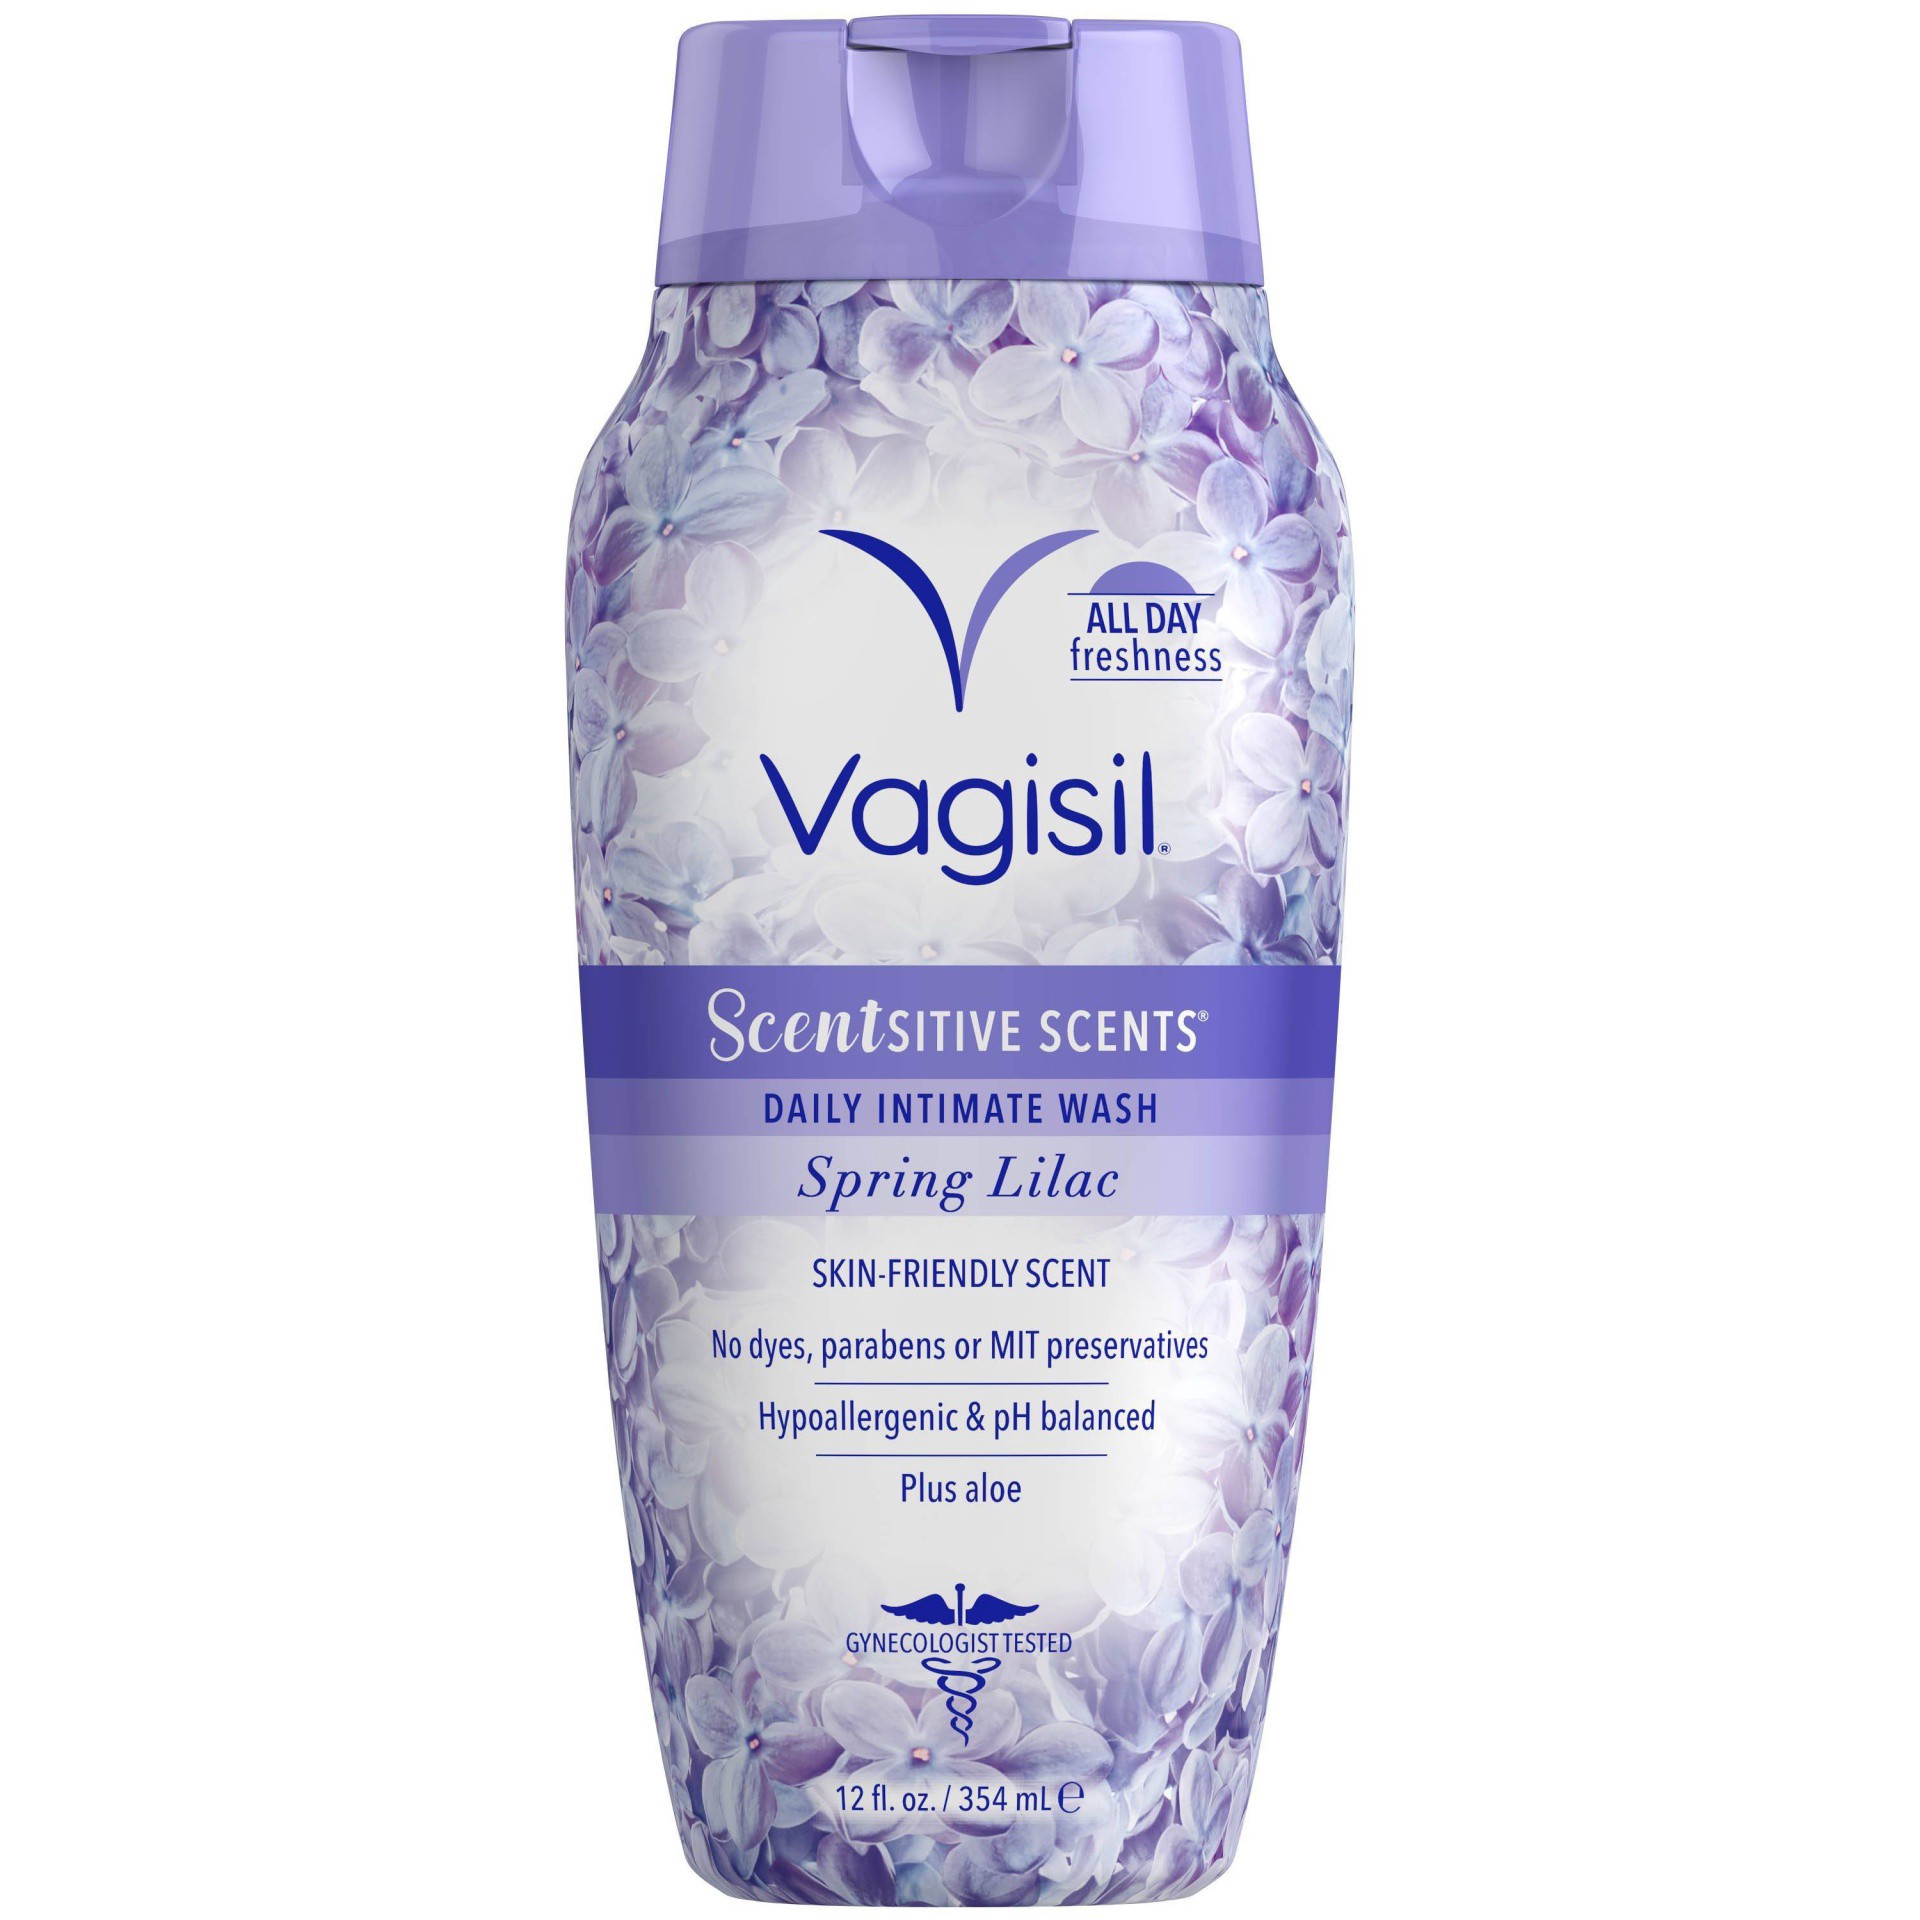 slide 1 of 6, Vagisil Scentsitive Scents Daily Intimate Vaginal Wash Spring Lilac Scent, 12 fl oz